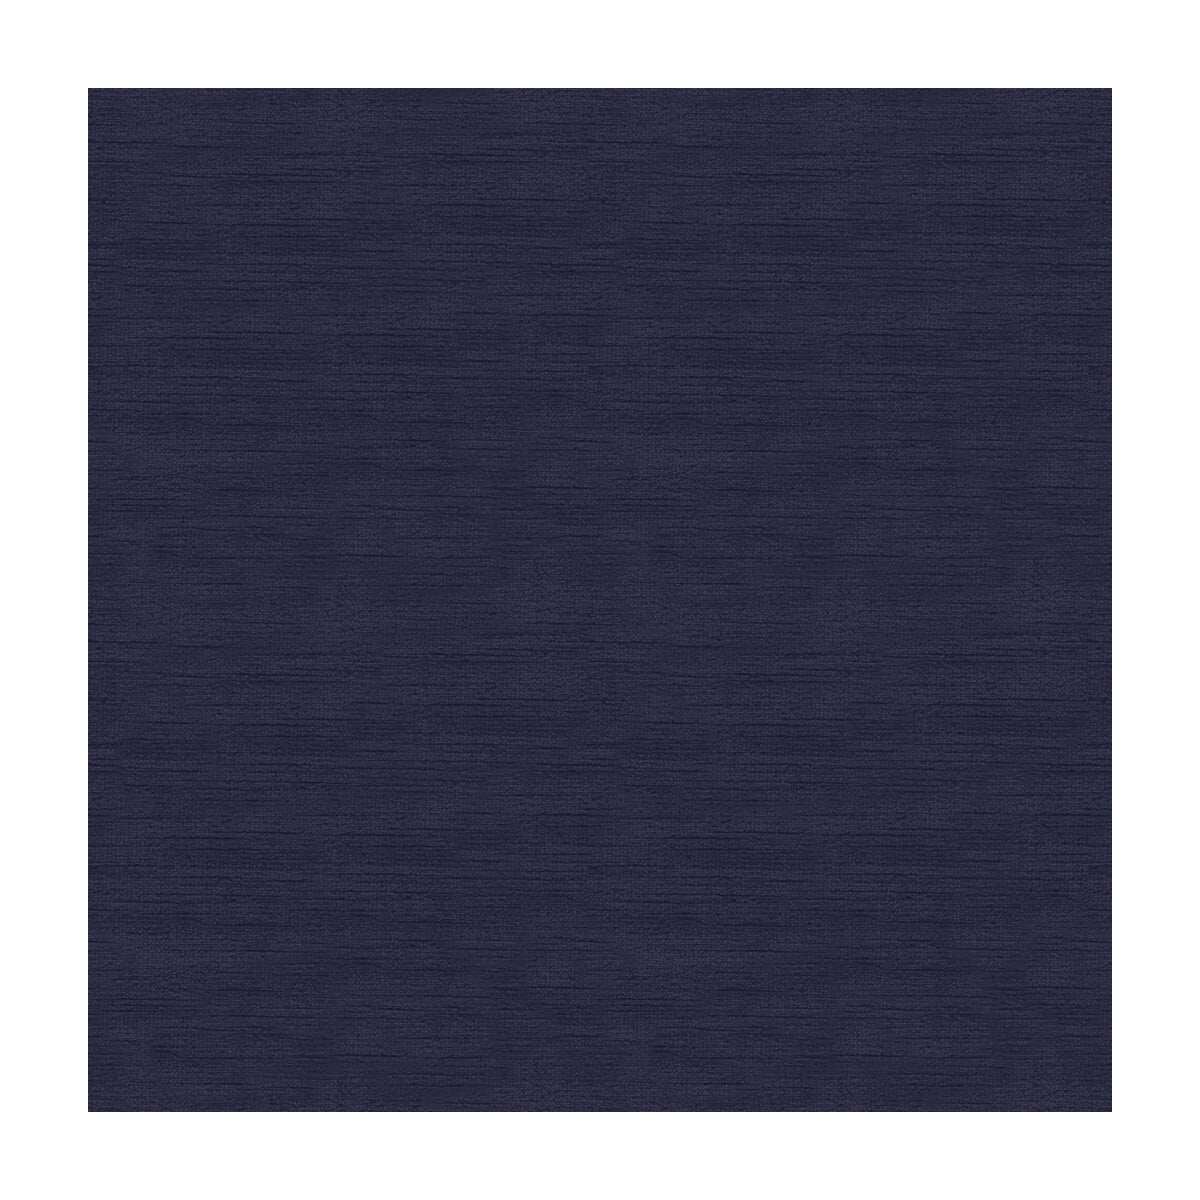 Venetian fabric in navy color - pattern 31326.505.0 - by Kravet Design in the The Complete Velvet collection